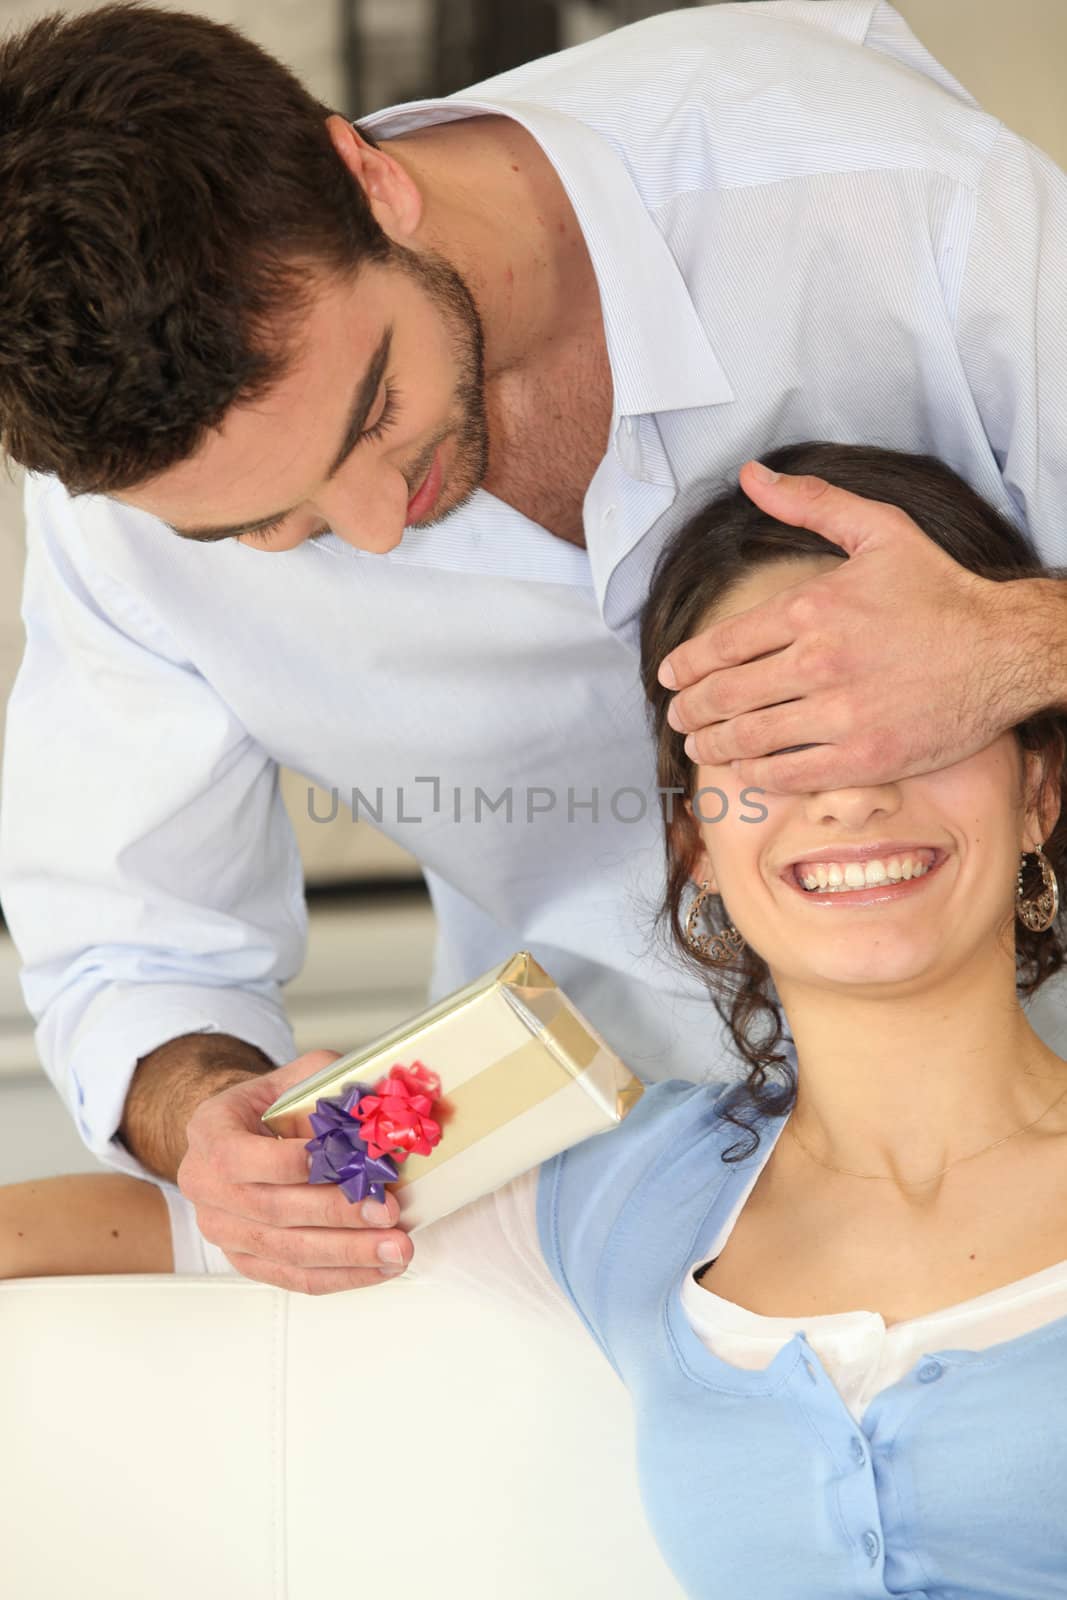 Man giving gift to woman by phovoir